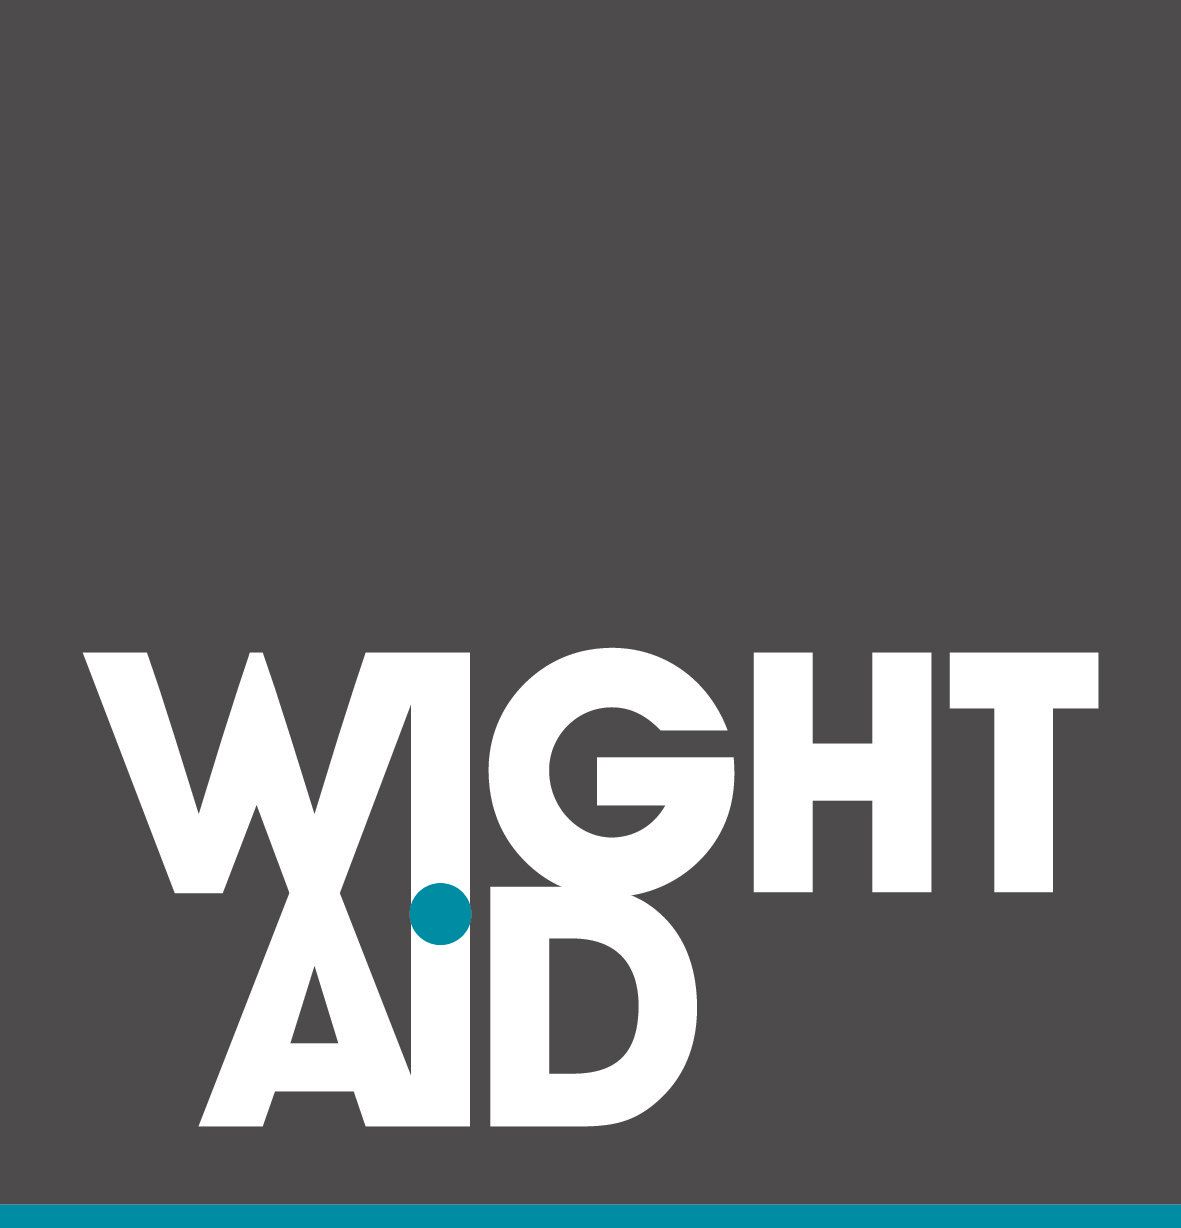 A logo for wright aid on a black background